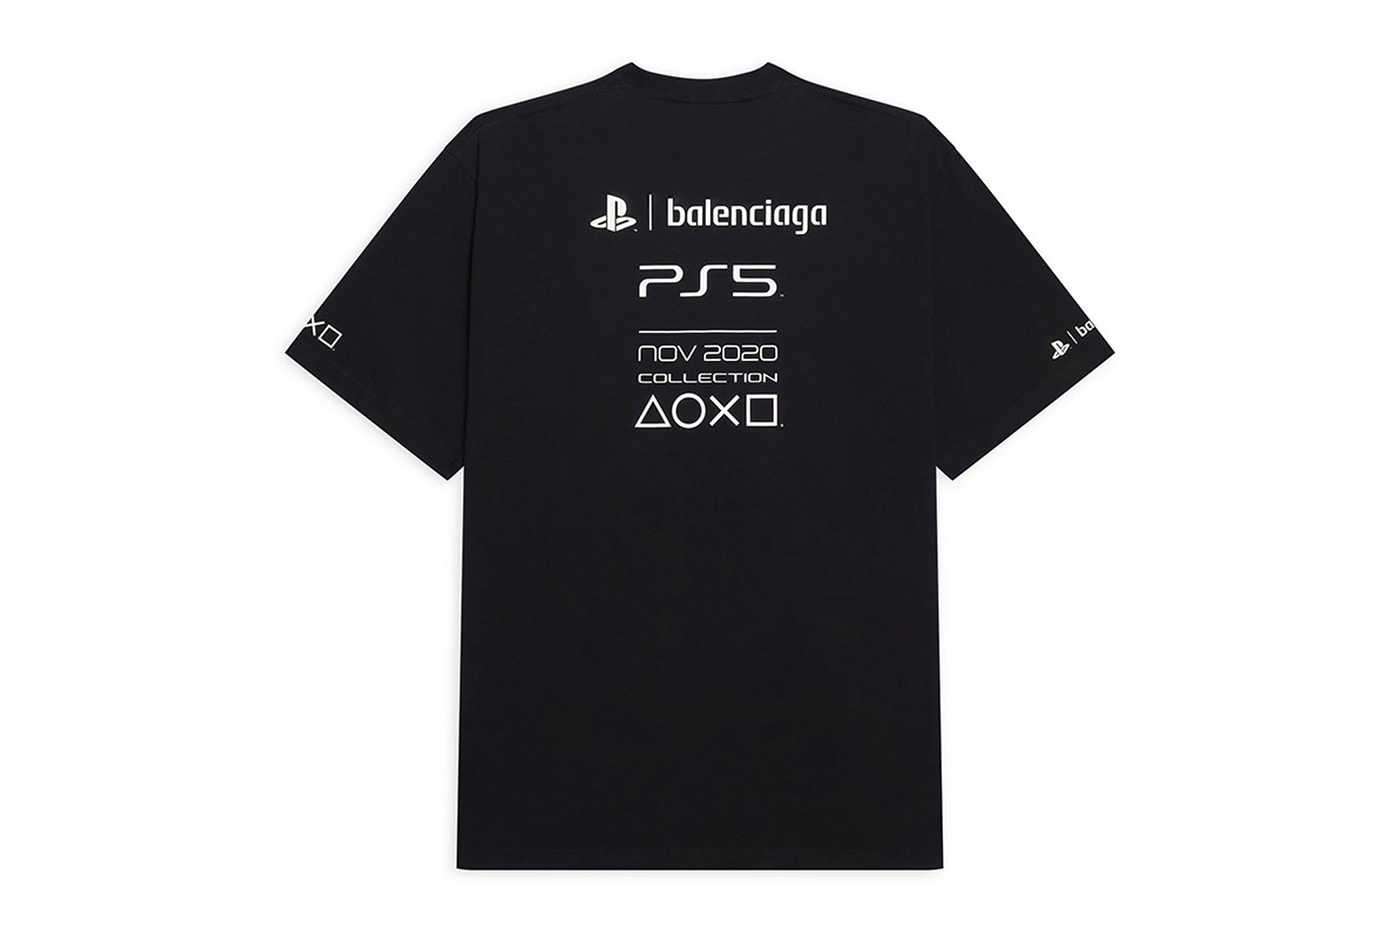 Sony PlayStation 5 x Balenciaga Capsule Release Gaming Hoodies T-Shirts Black White Red